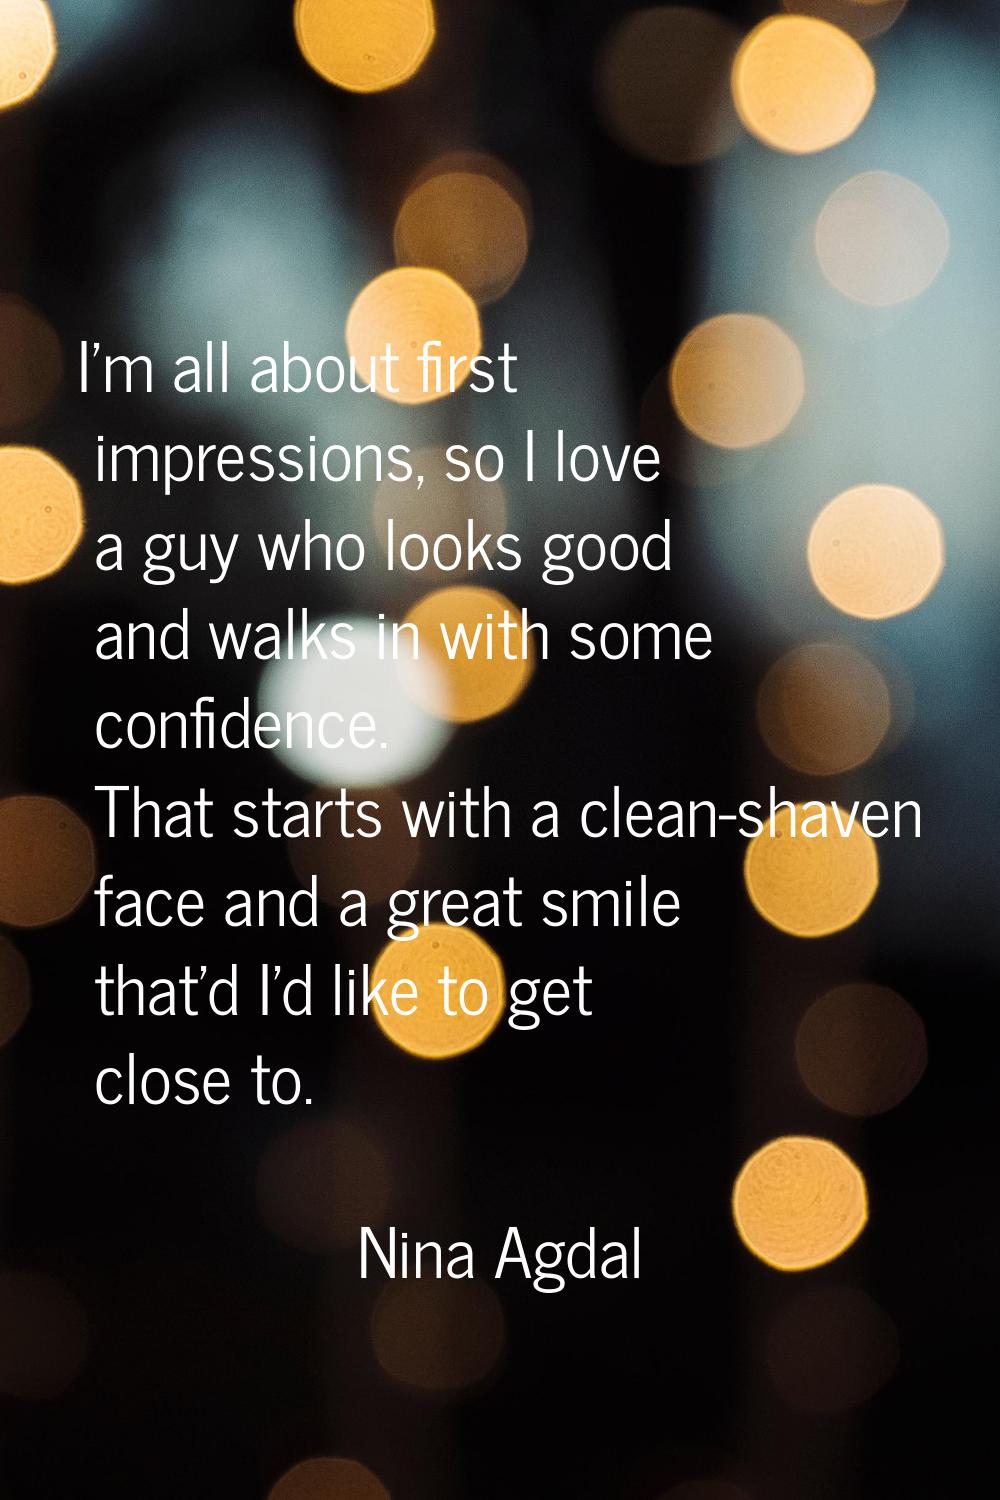 I'm all about first impressions, so I love a guy who looks good and walks in with some confidence. 